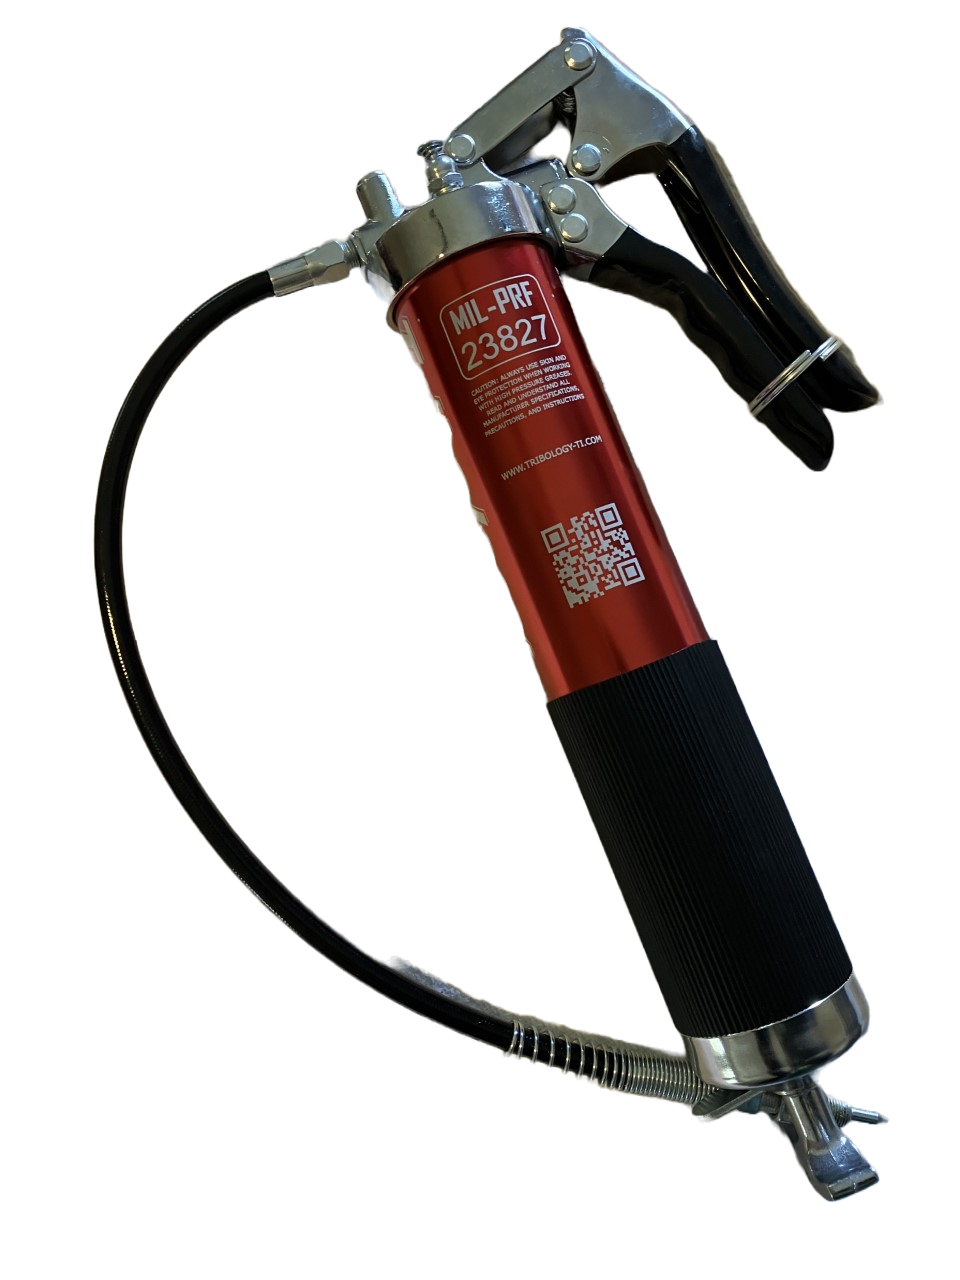 5000 PSI Pistol Grip Anodized Red Grease Gun MIL-SPEC Inscribed.